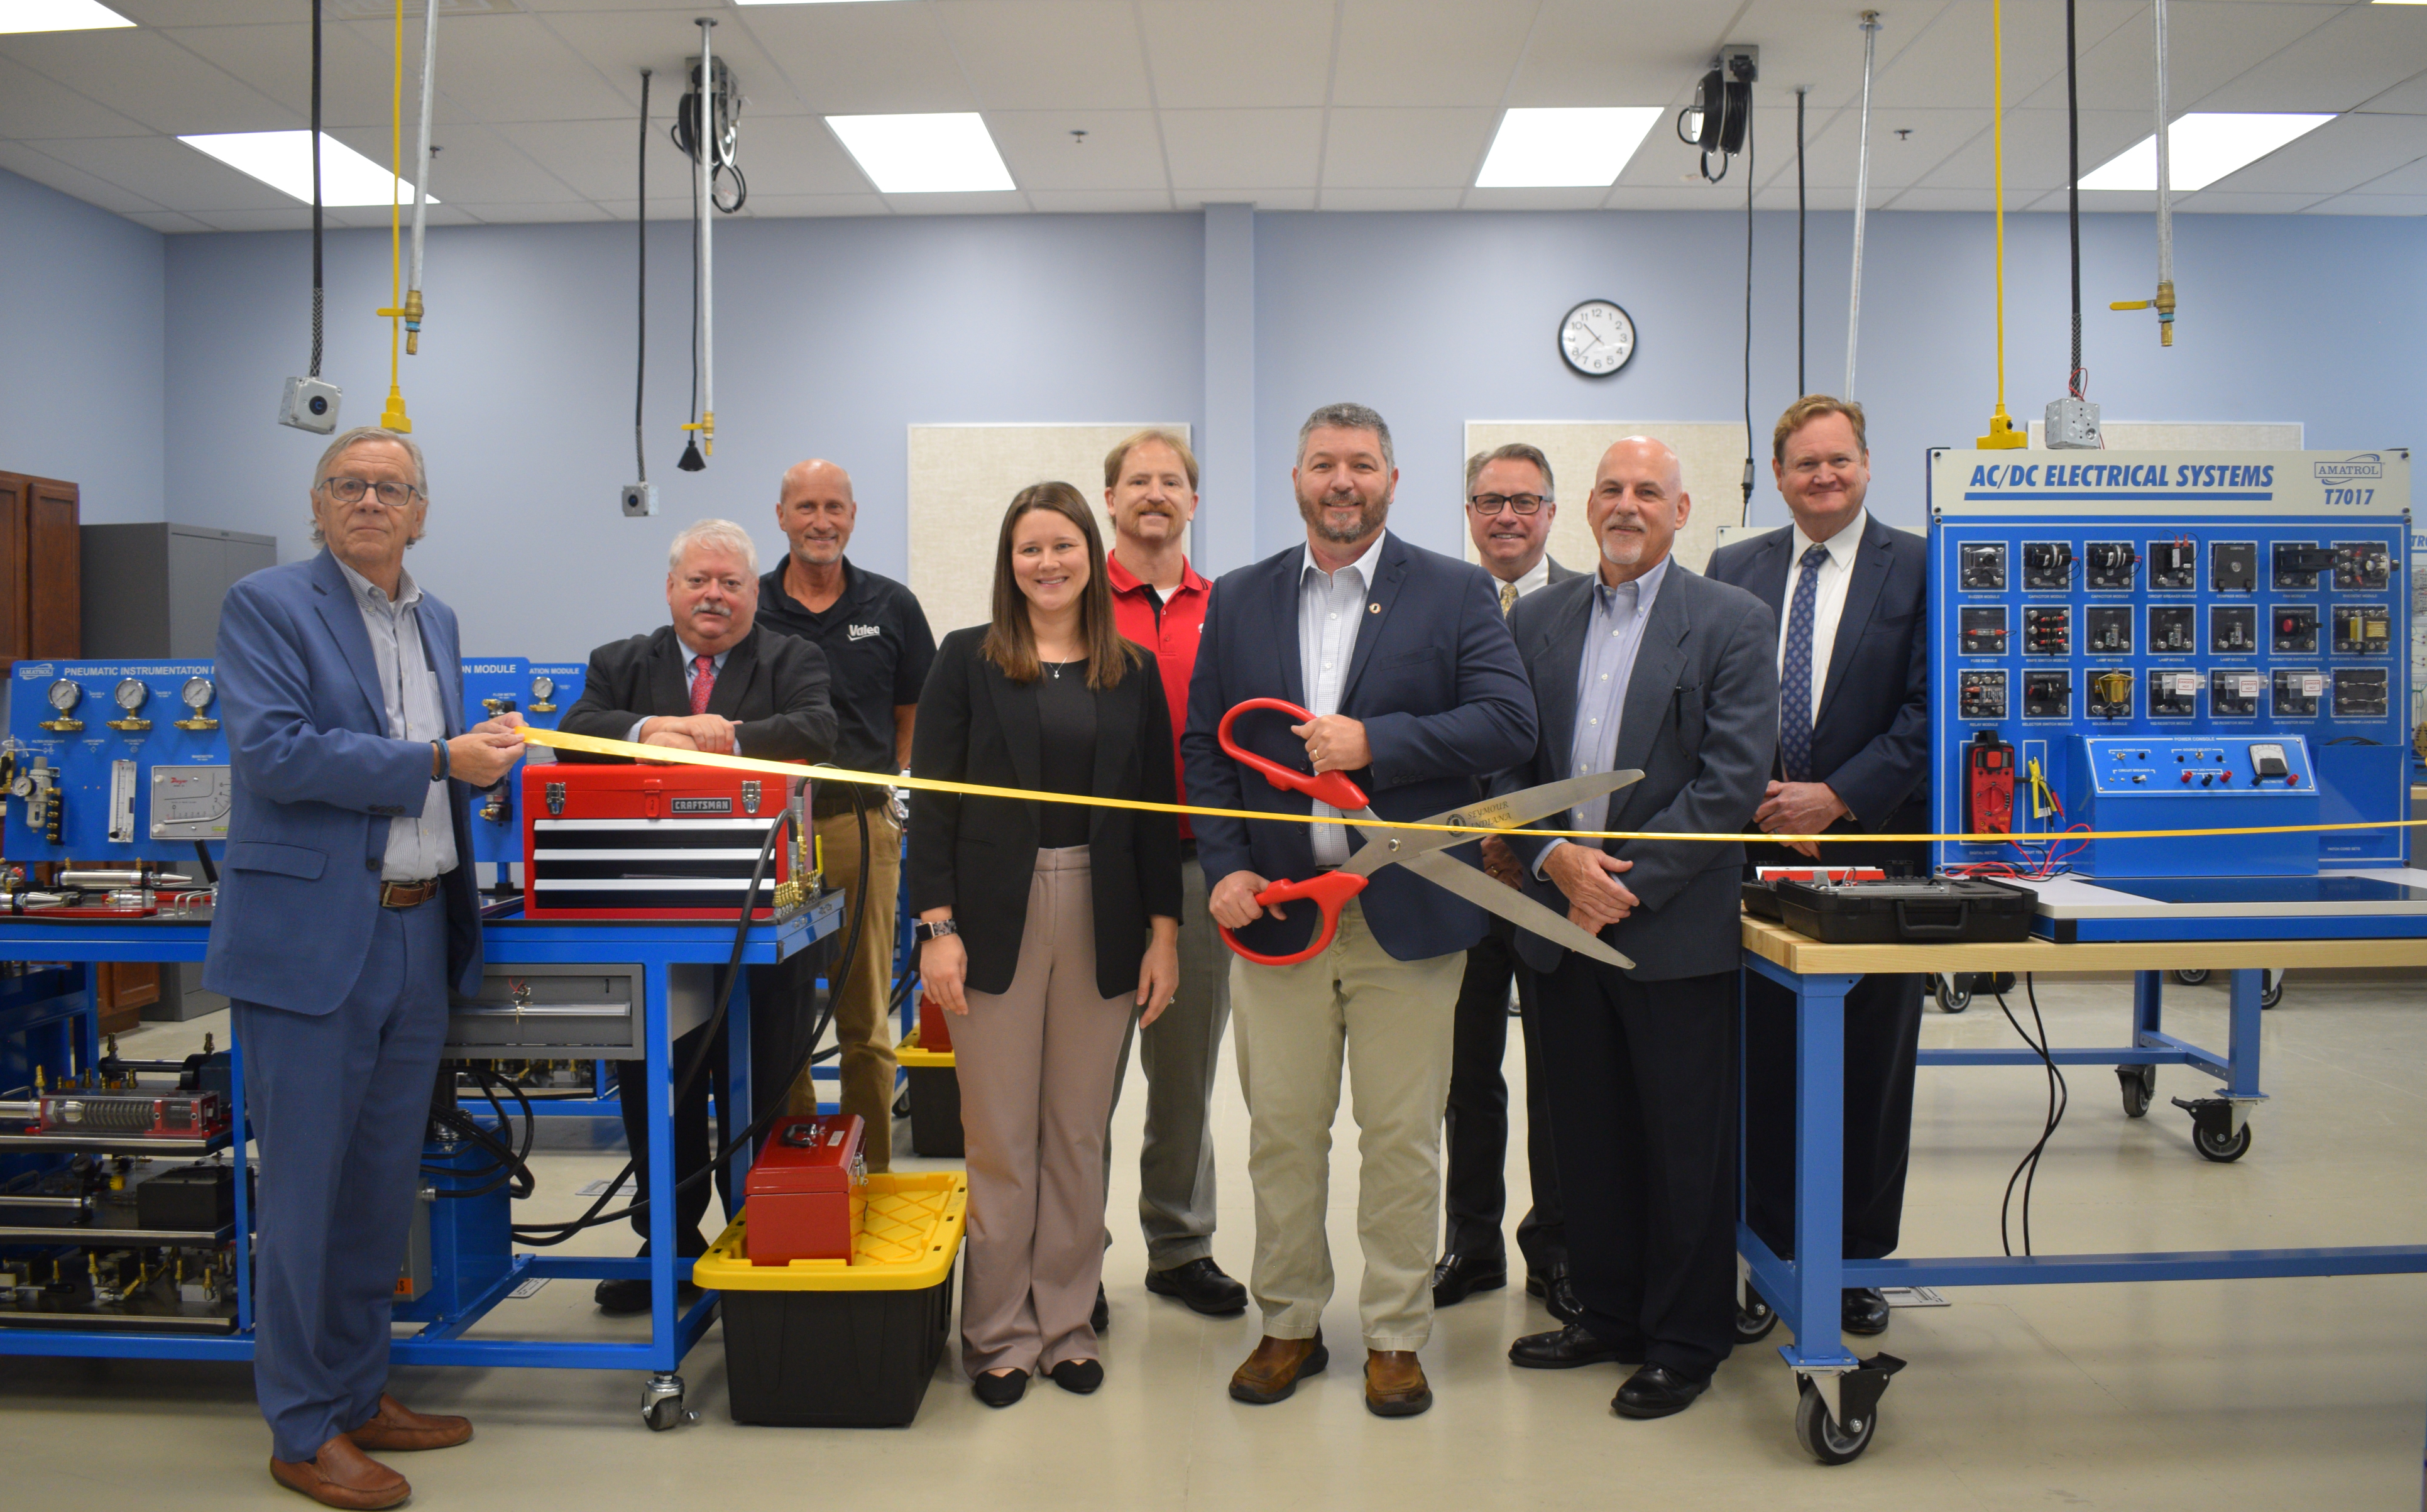 City, county, state and VU officials pose for a photograph as they cut a ribbon on the VU industrial maintenance lab. A man is holding a large set of scissors while another holds the yellow ribbon. The group is surrounded by training equipment.